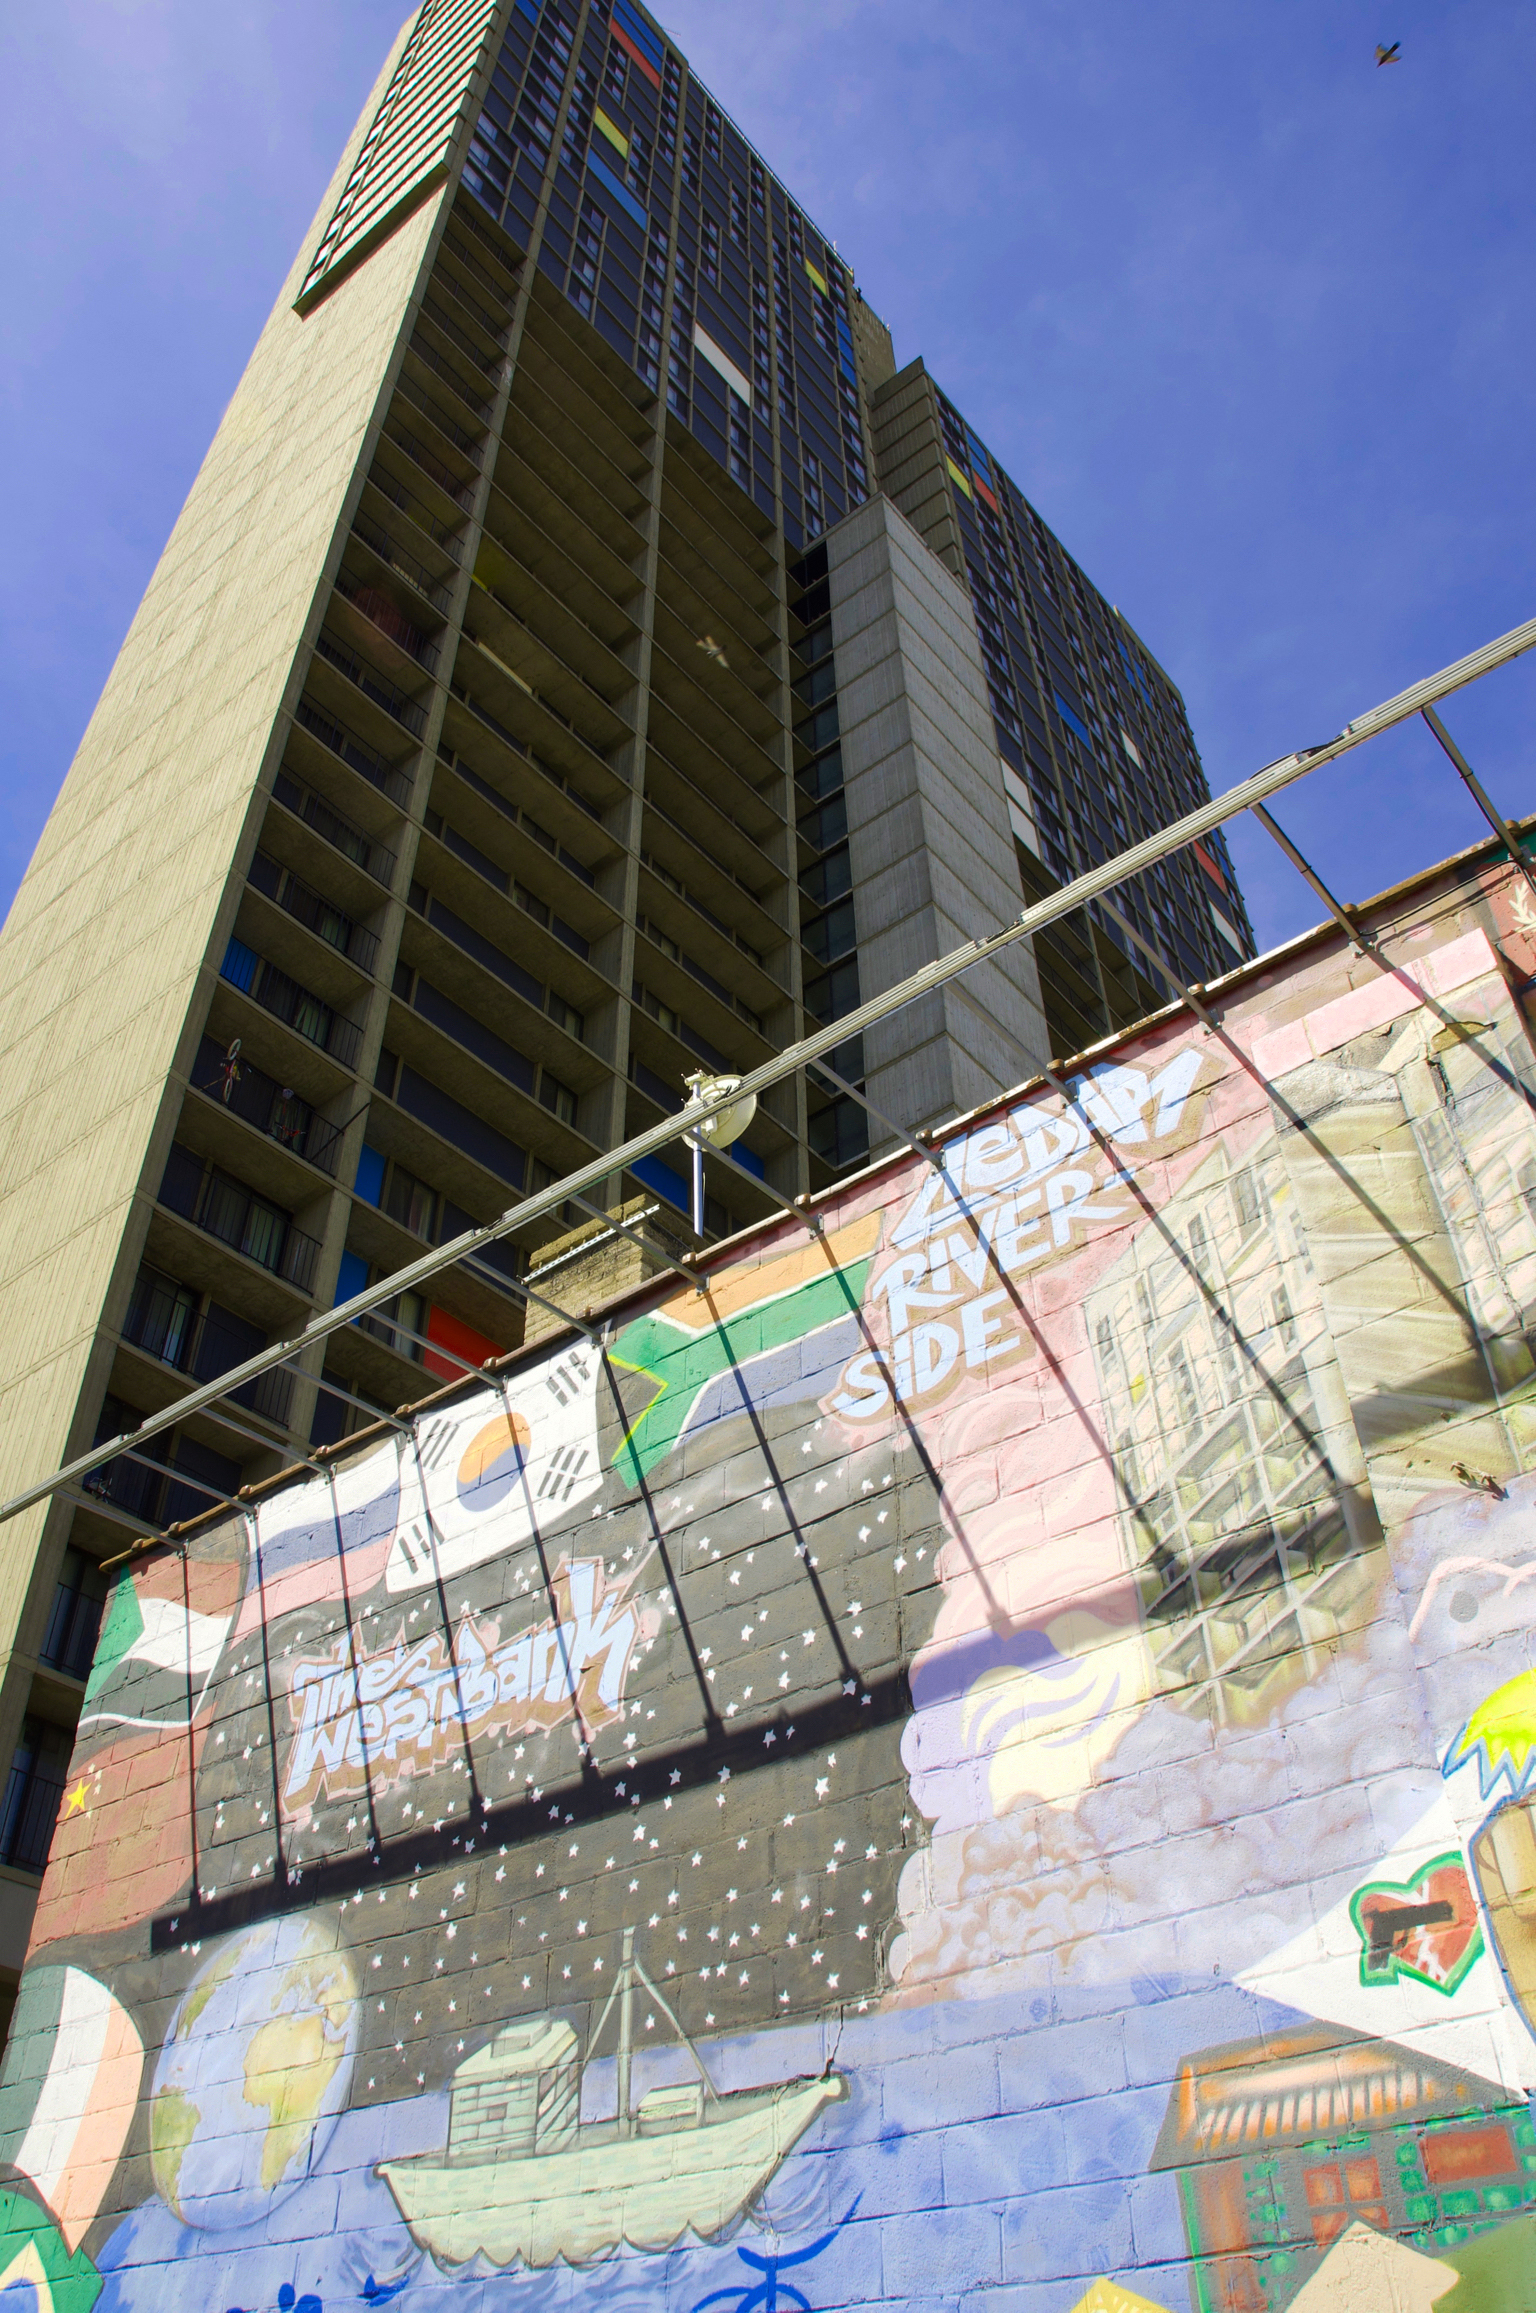 One of several high-rise apartment buildings Cedar-Riverside that is home to a large part of Minneapolis's Somali population. The wall mural in the foreground, with its many flags and depictions of various cultural elements, highlights the area's diversity